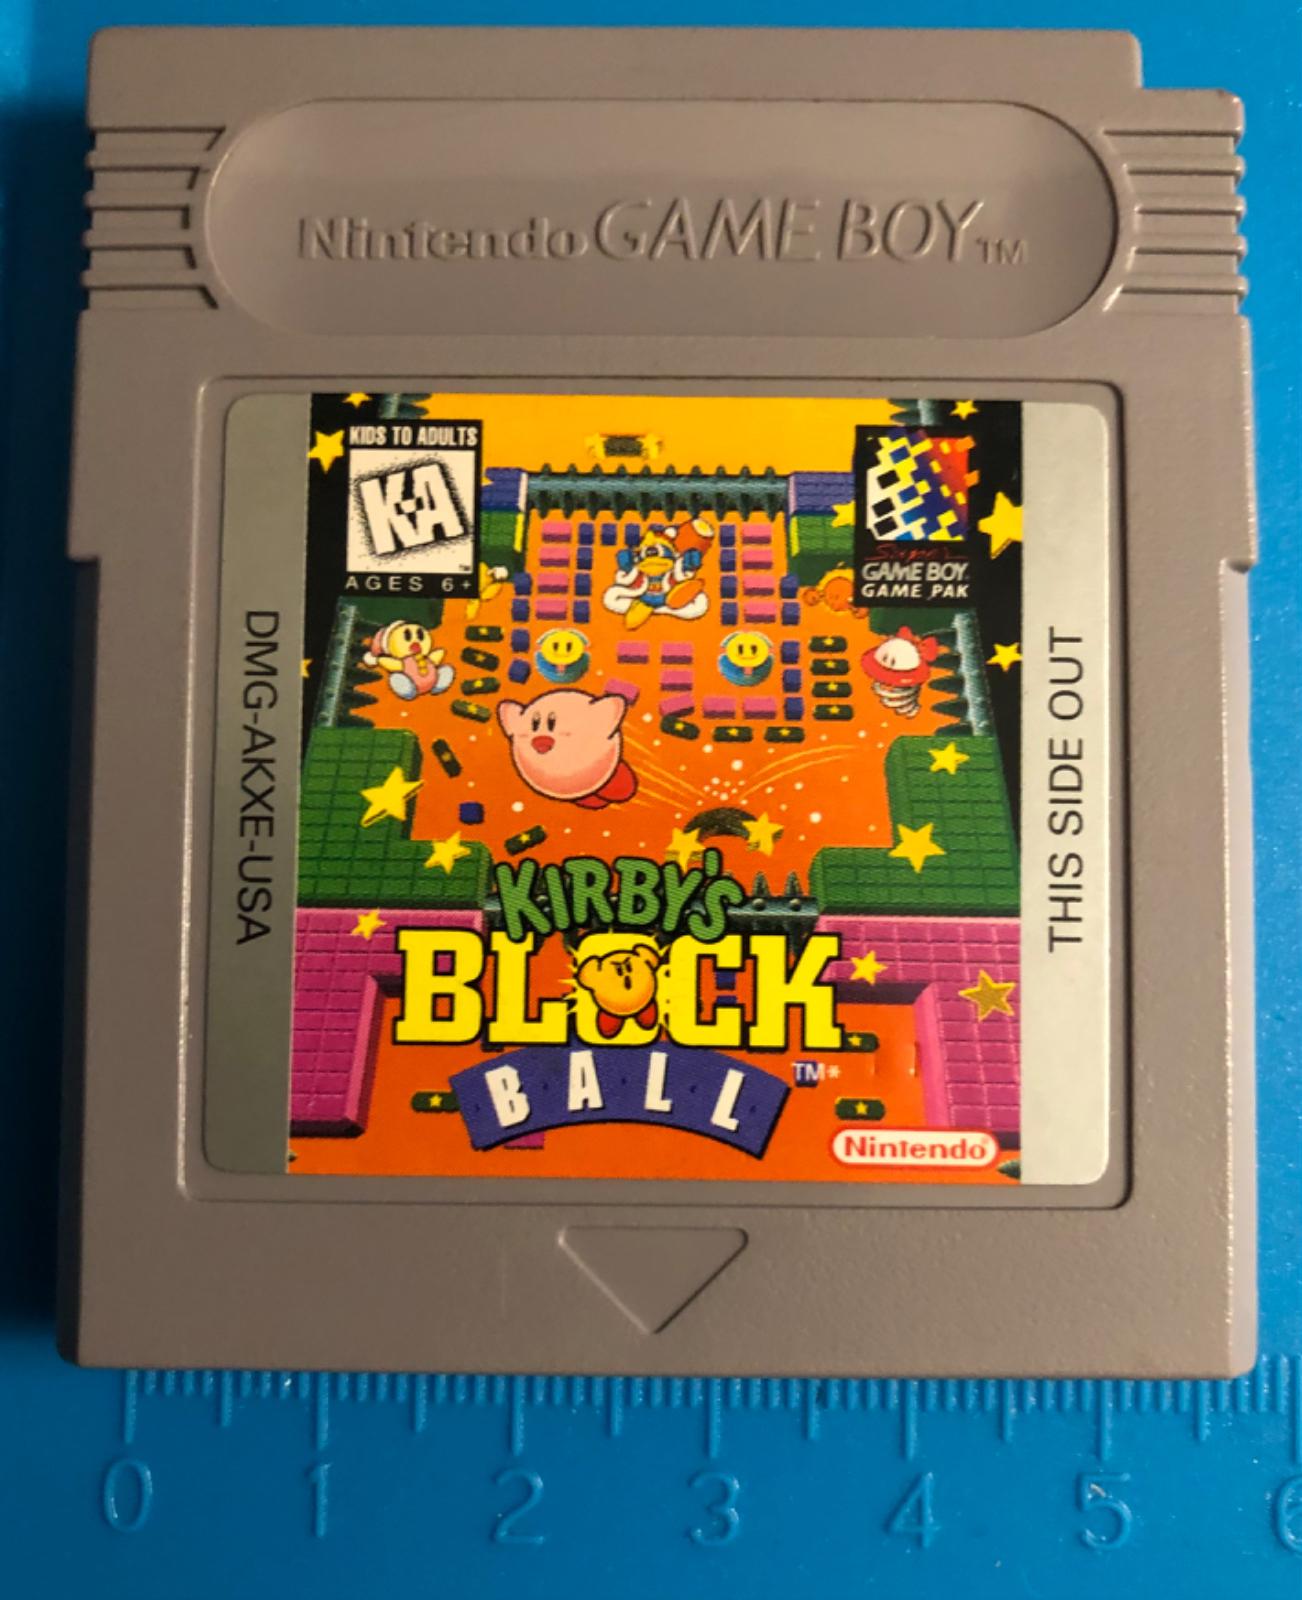 Kirby's Block Ball Prices GameBoy | Compare Loose, CIB & New Prices